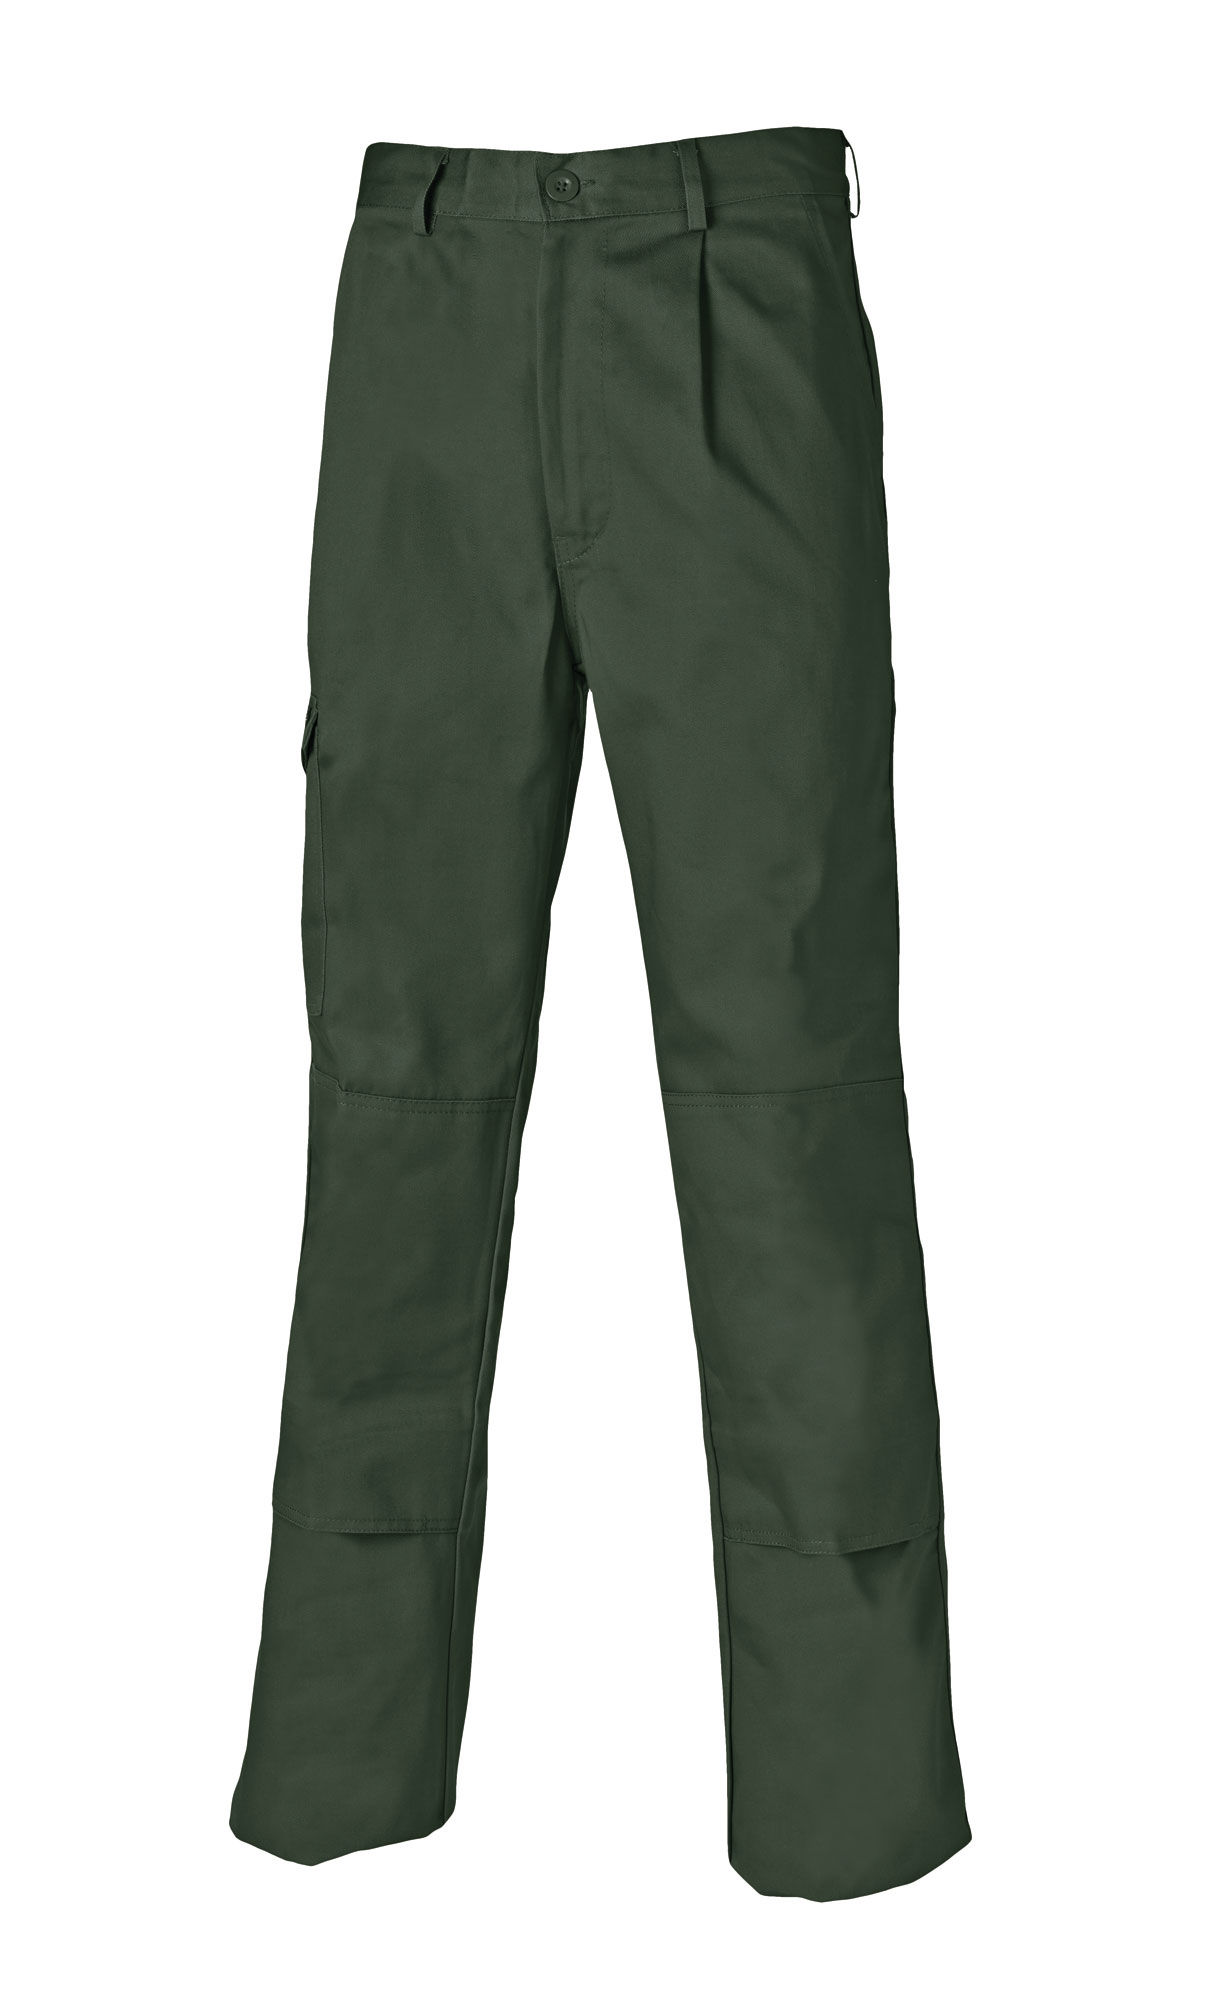 Promotional Dickies Redhawk Action Trouser, Personalised by MoJo Promotions